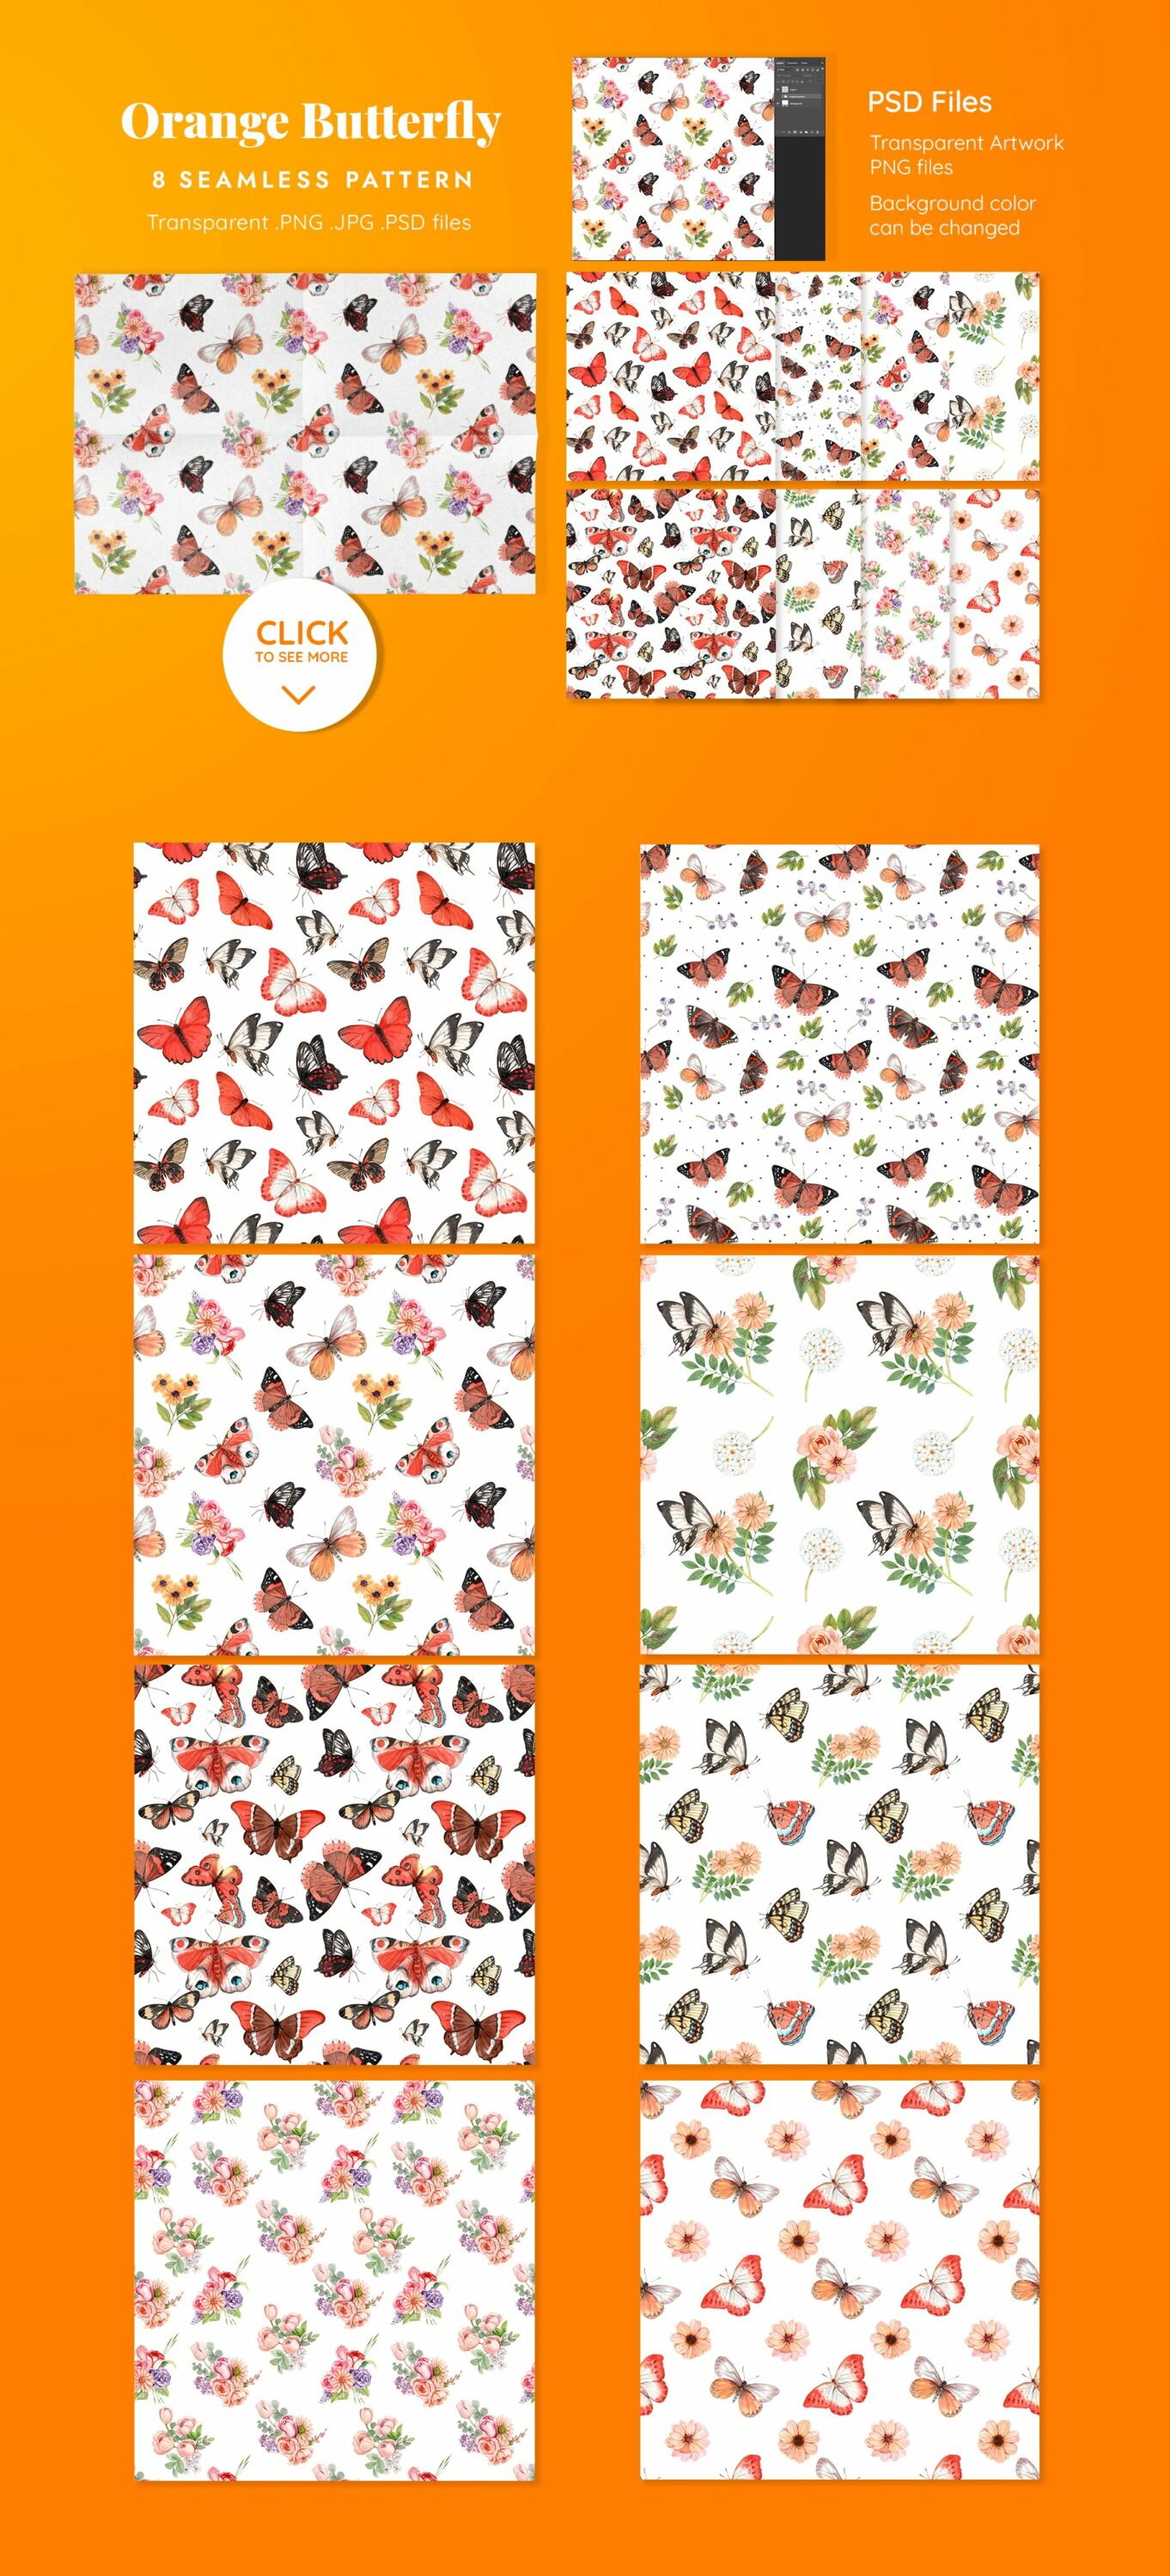 Oange butterfly presentation patterns for different purposes.